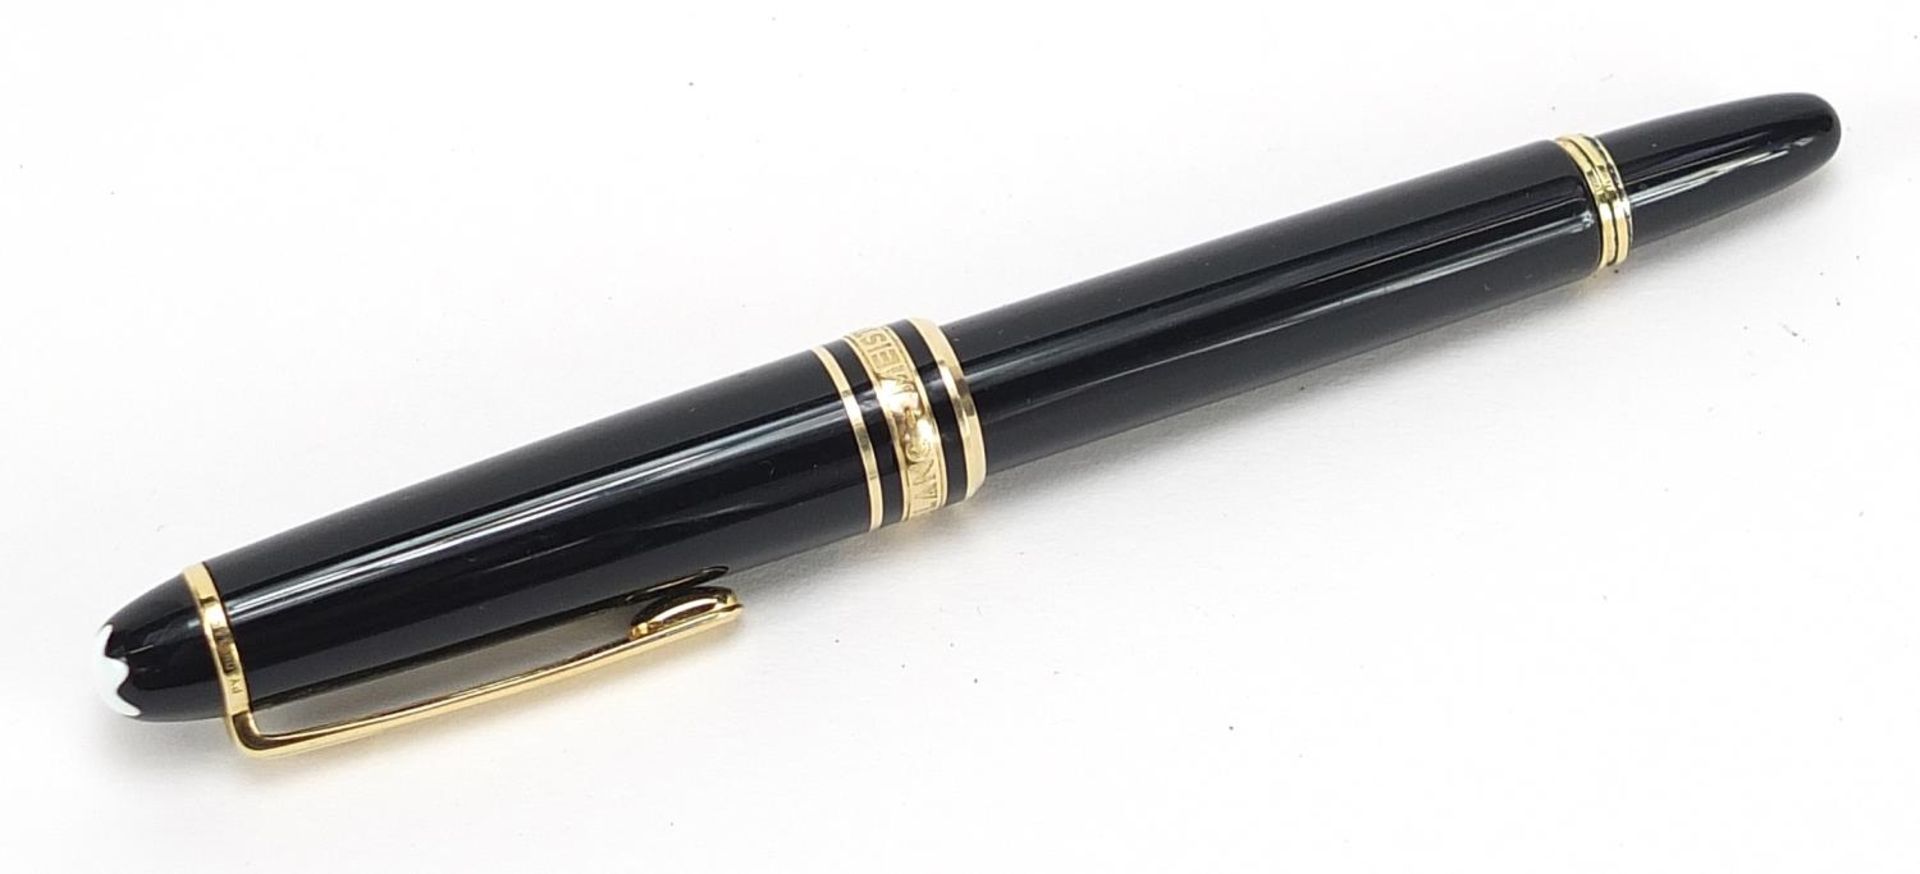 Montblanc Meisterstuck fountain pen with 14k gold nib numbered 4810, serial number PY1046185 - Image 4 of 5